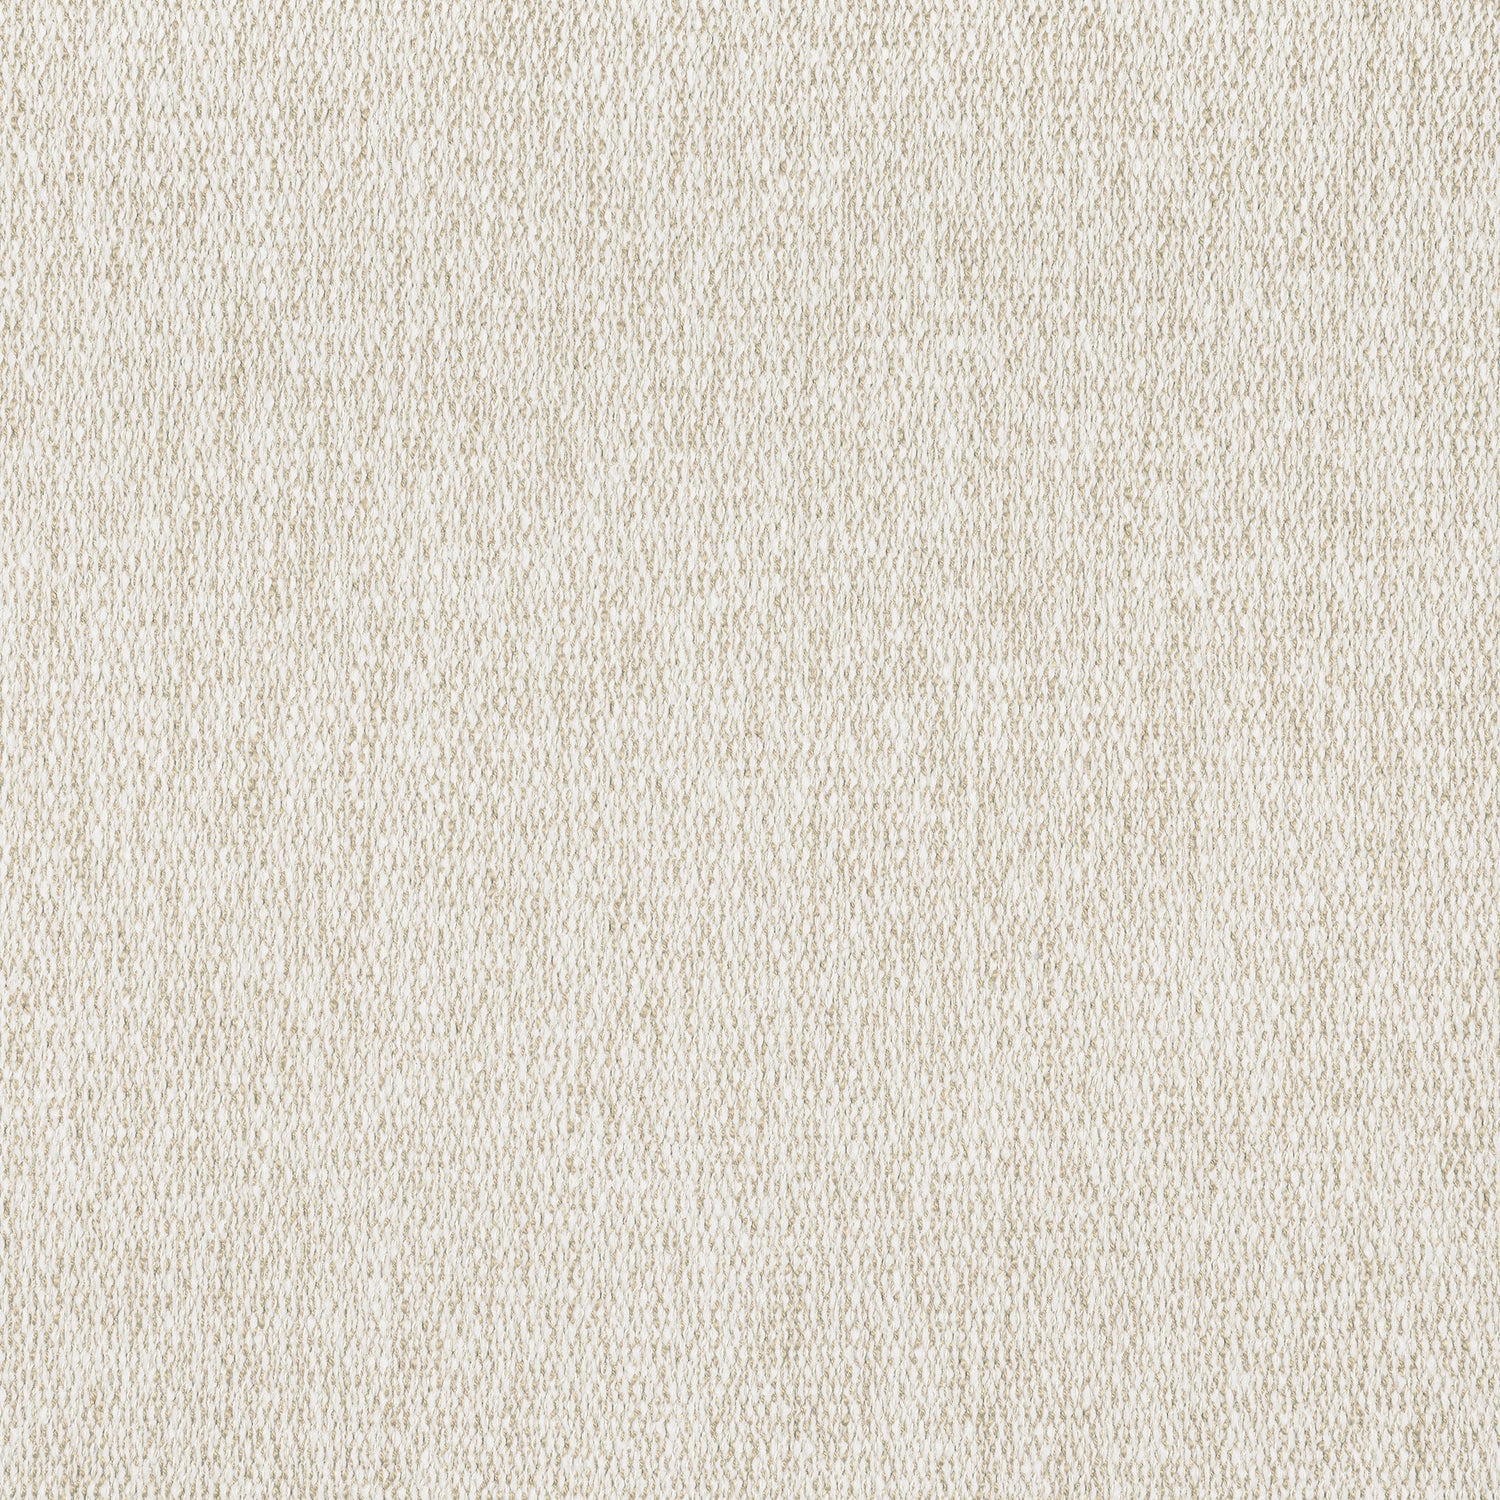 Arroyo fabric in almond color - pattern number W8780 - by Thibaut in the Haven Textures collection